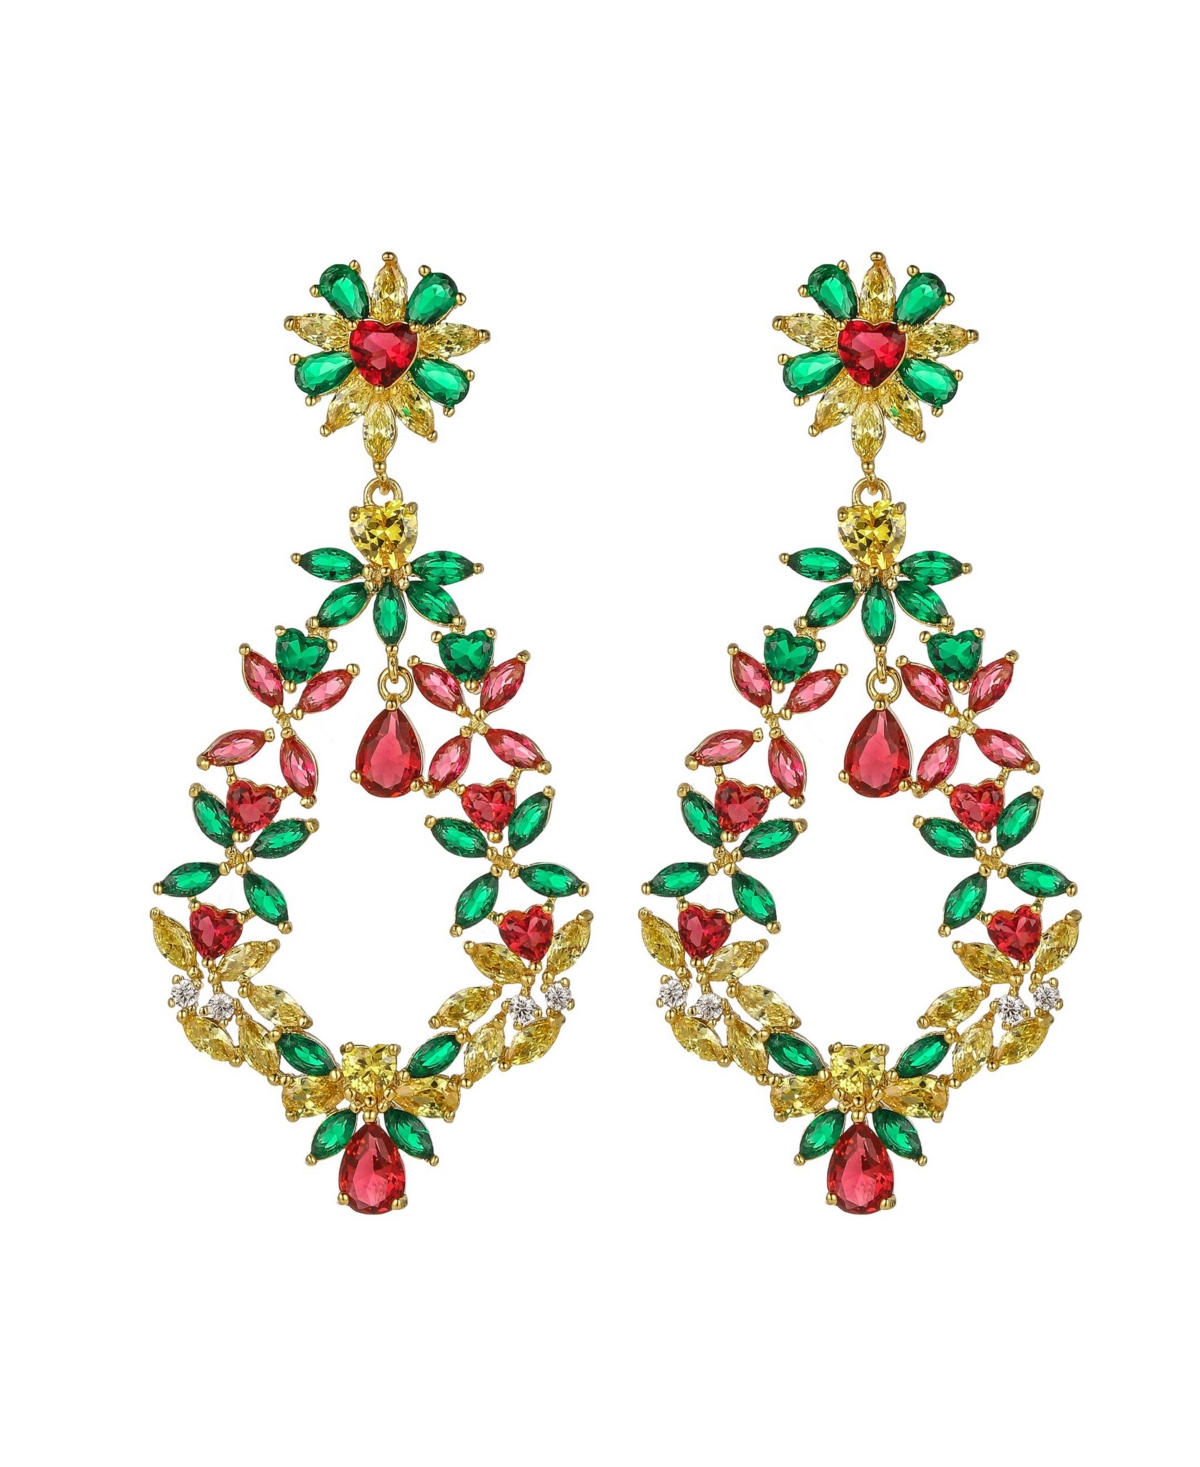 A & M Gold-Tone Emerald and Ruby Accent Earrings